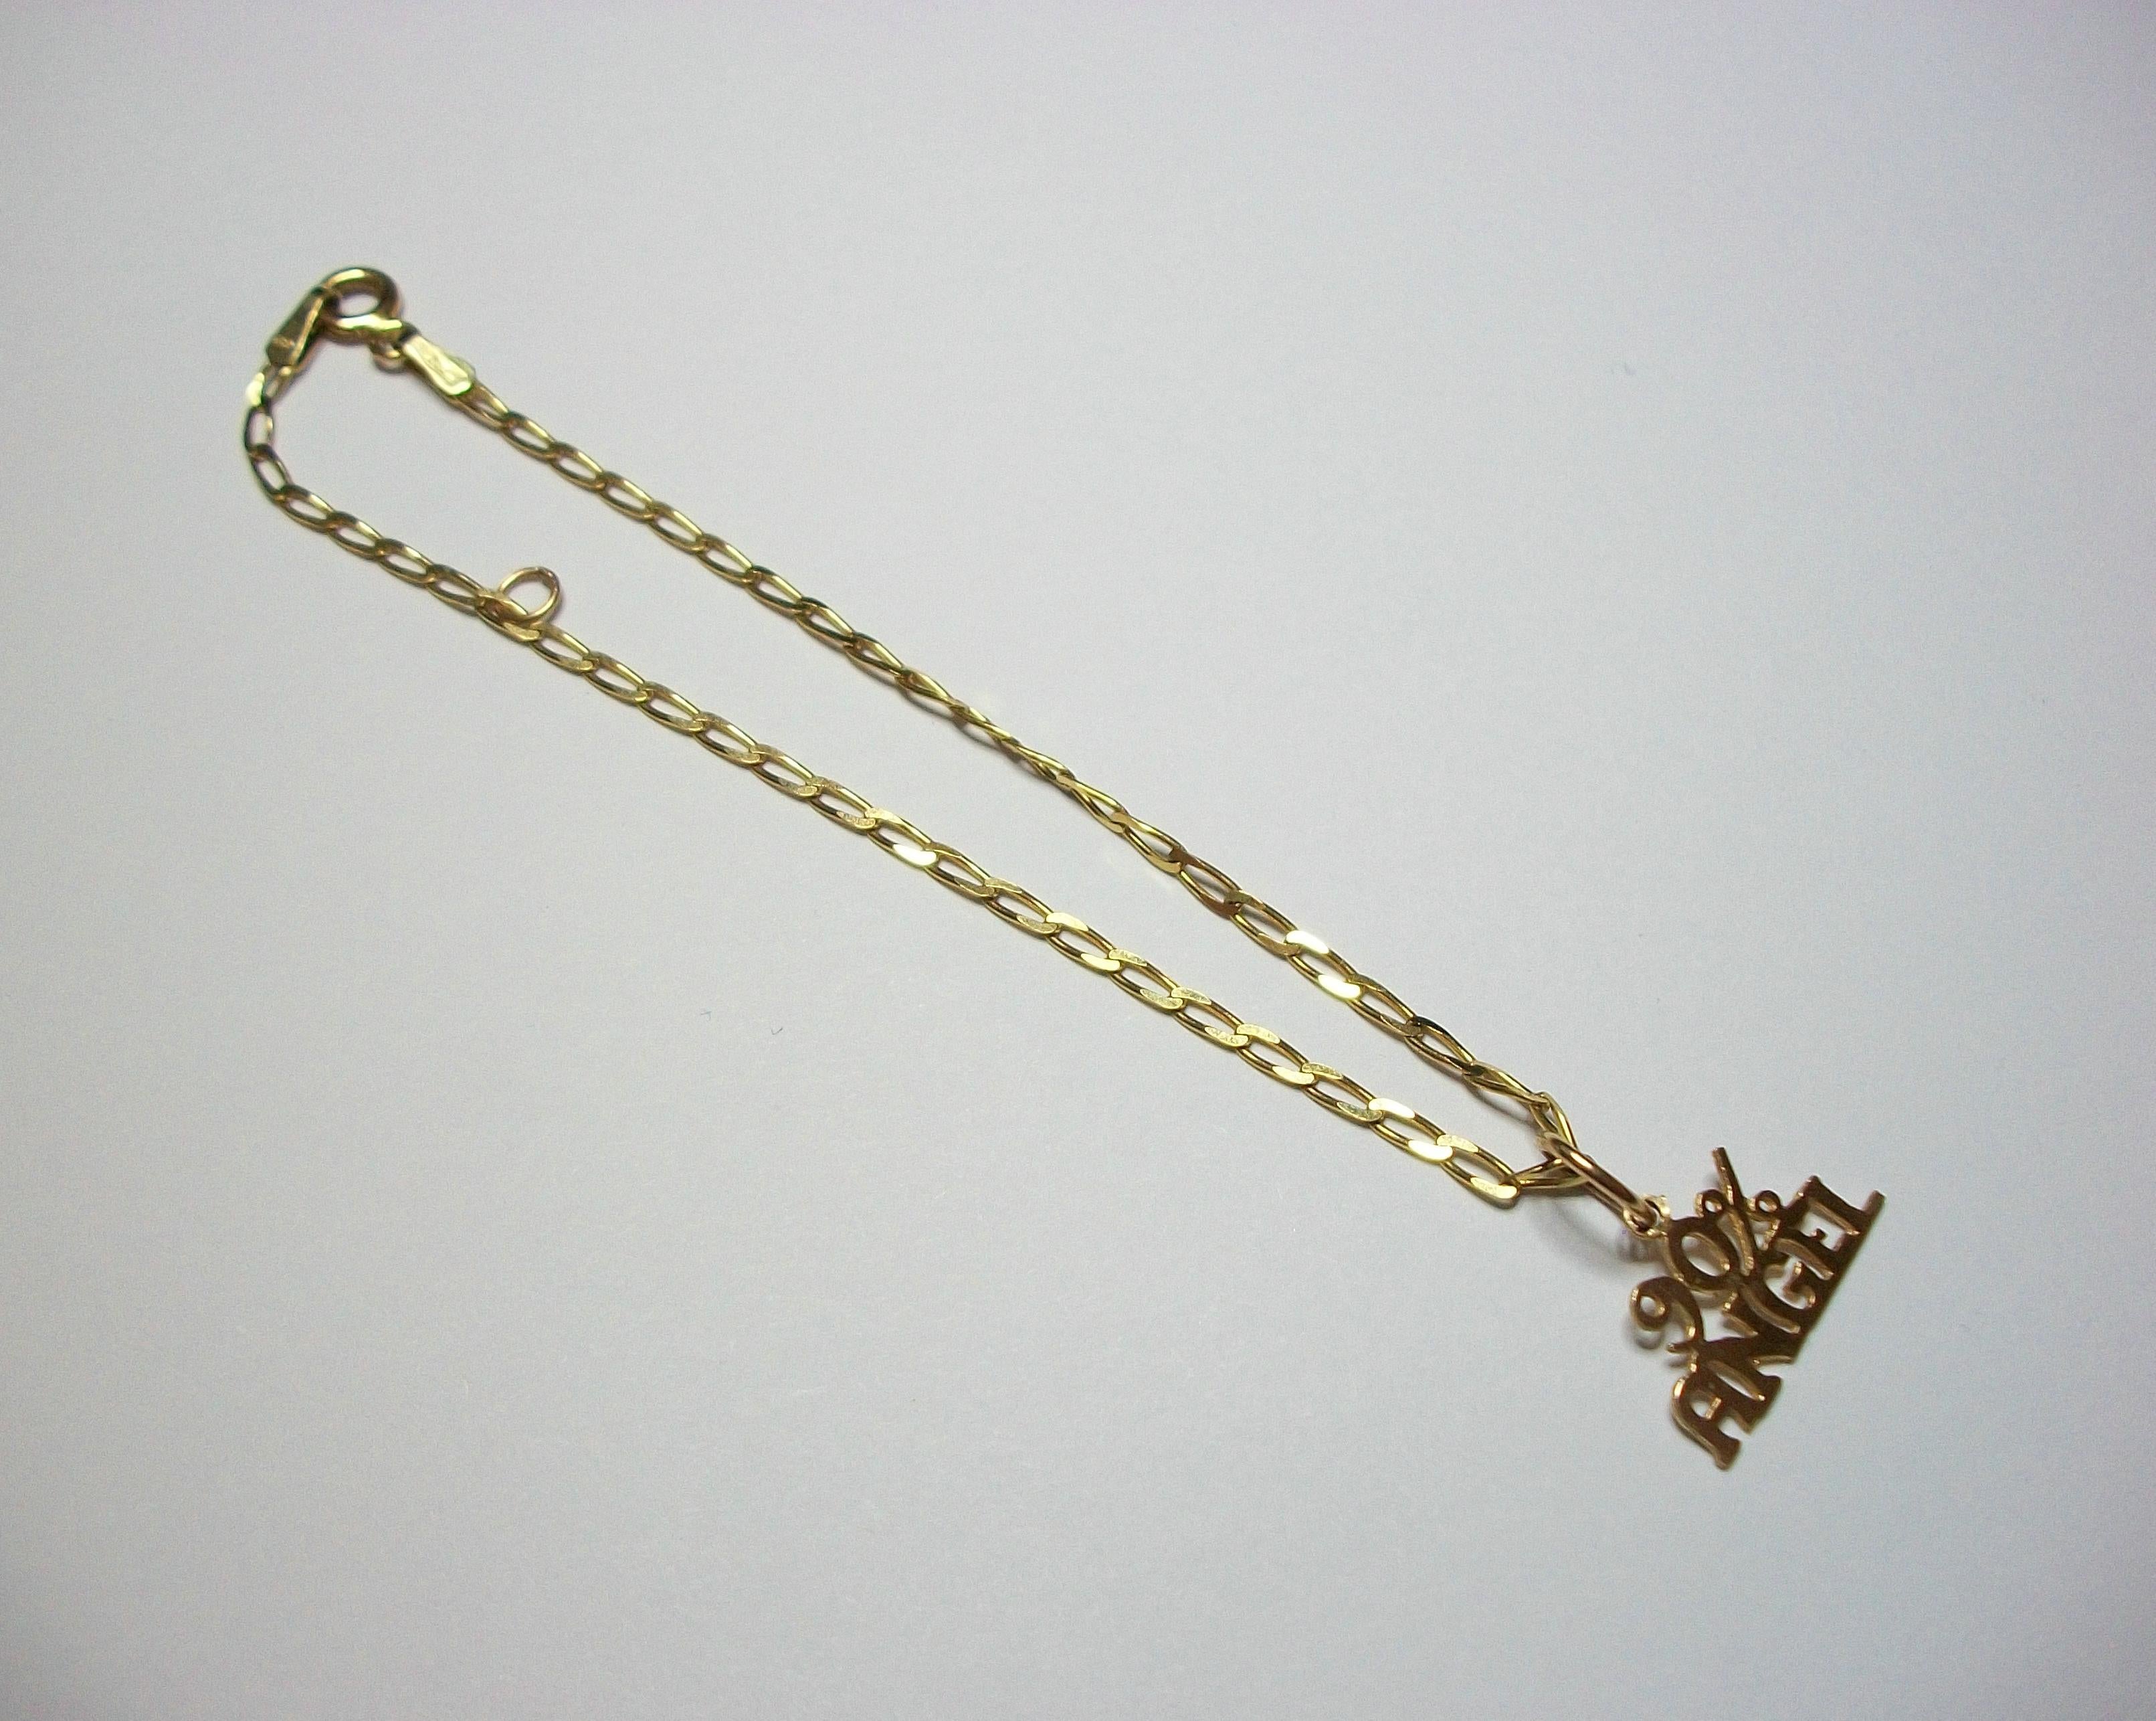 Women's Vintage 10K Gold Chain Link Bracelet - 90% Angel Charm - Signed - Italy - 20th C For Sale